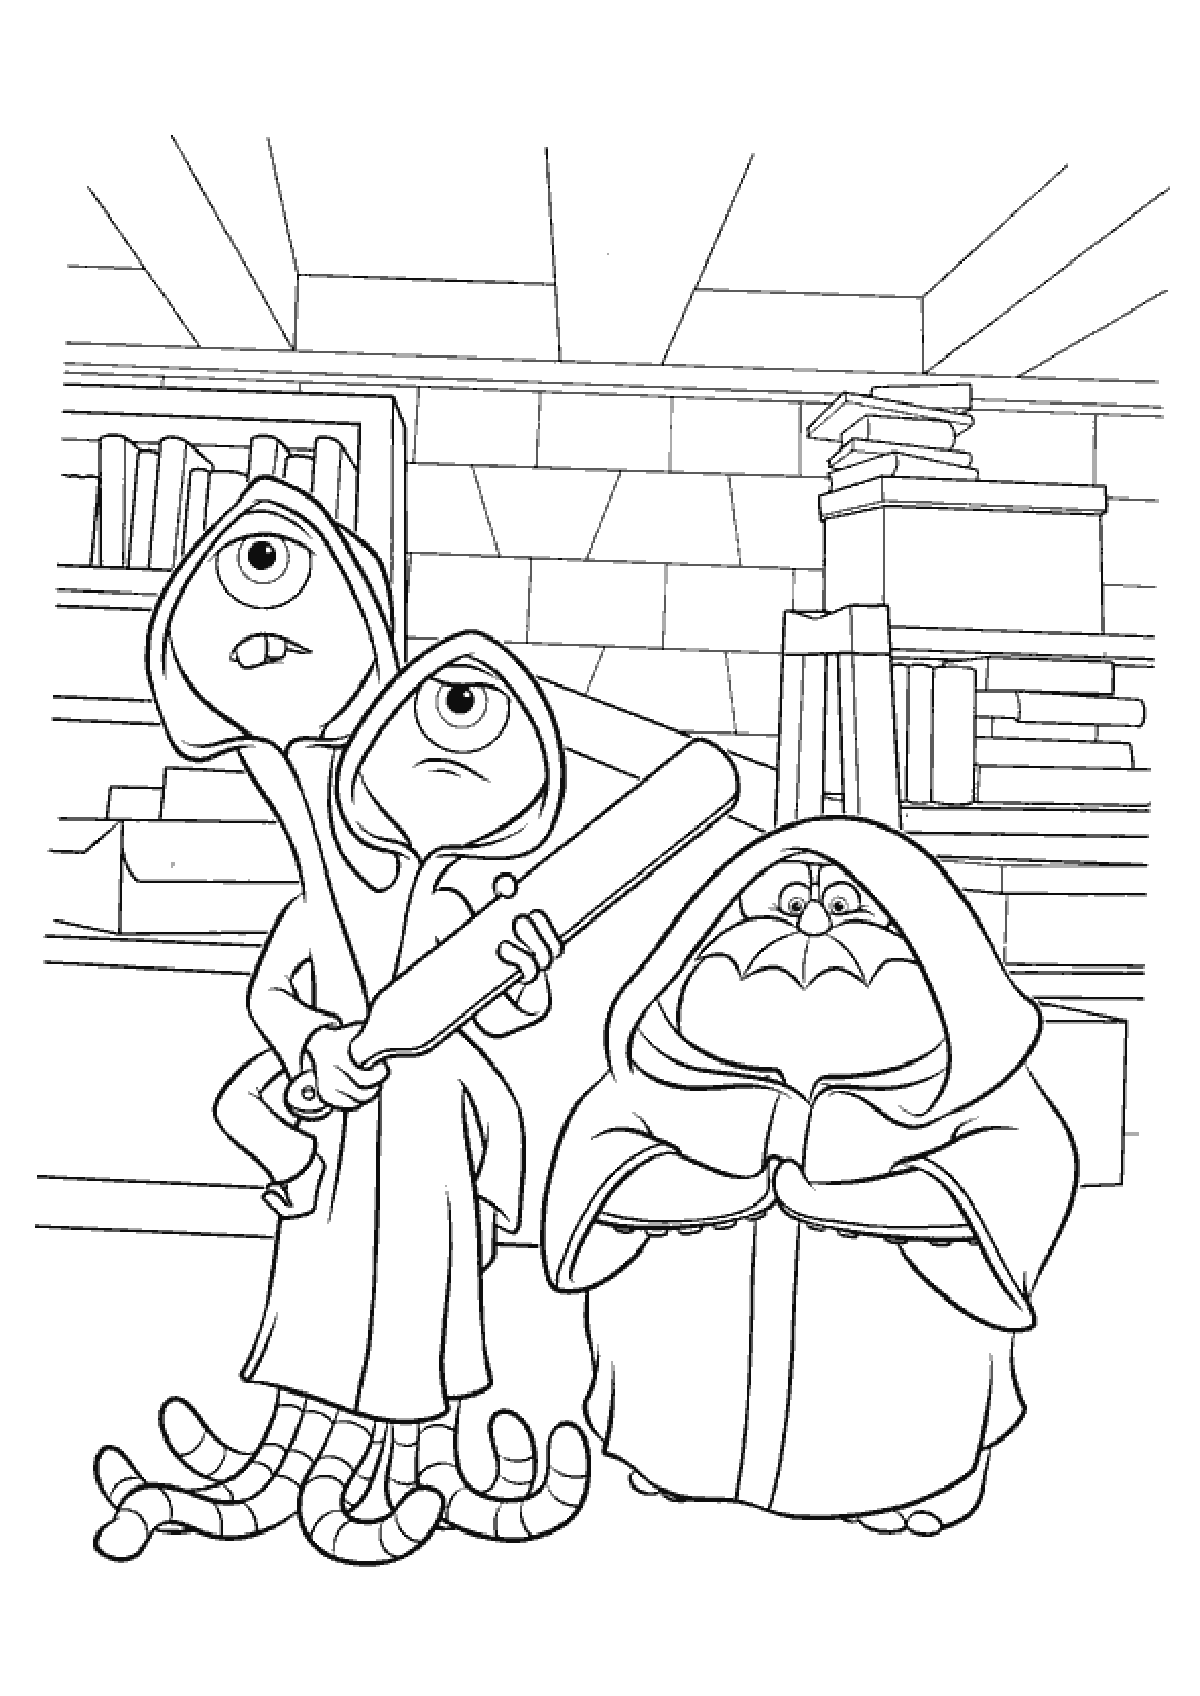 Monsters university Coloring pages 🖌 to print and color